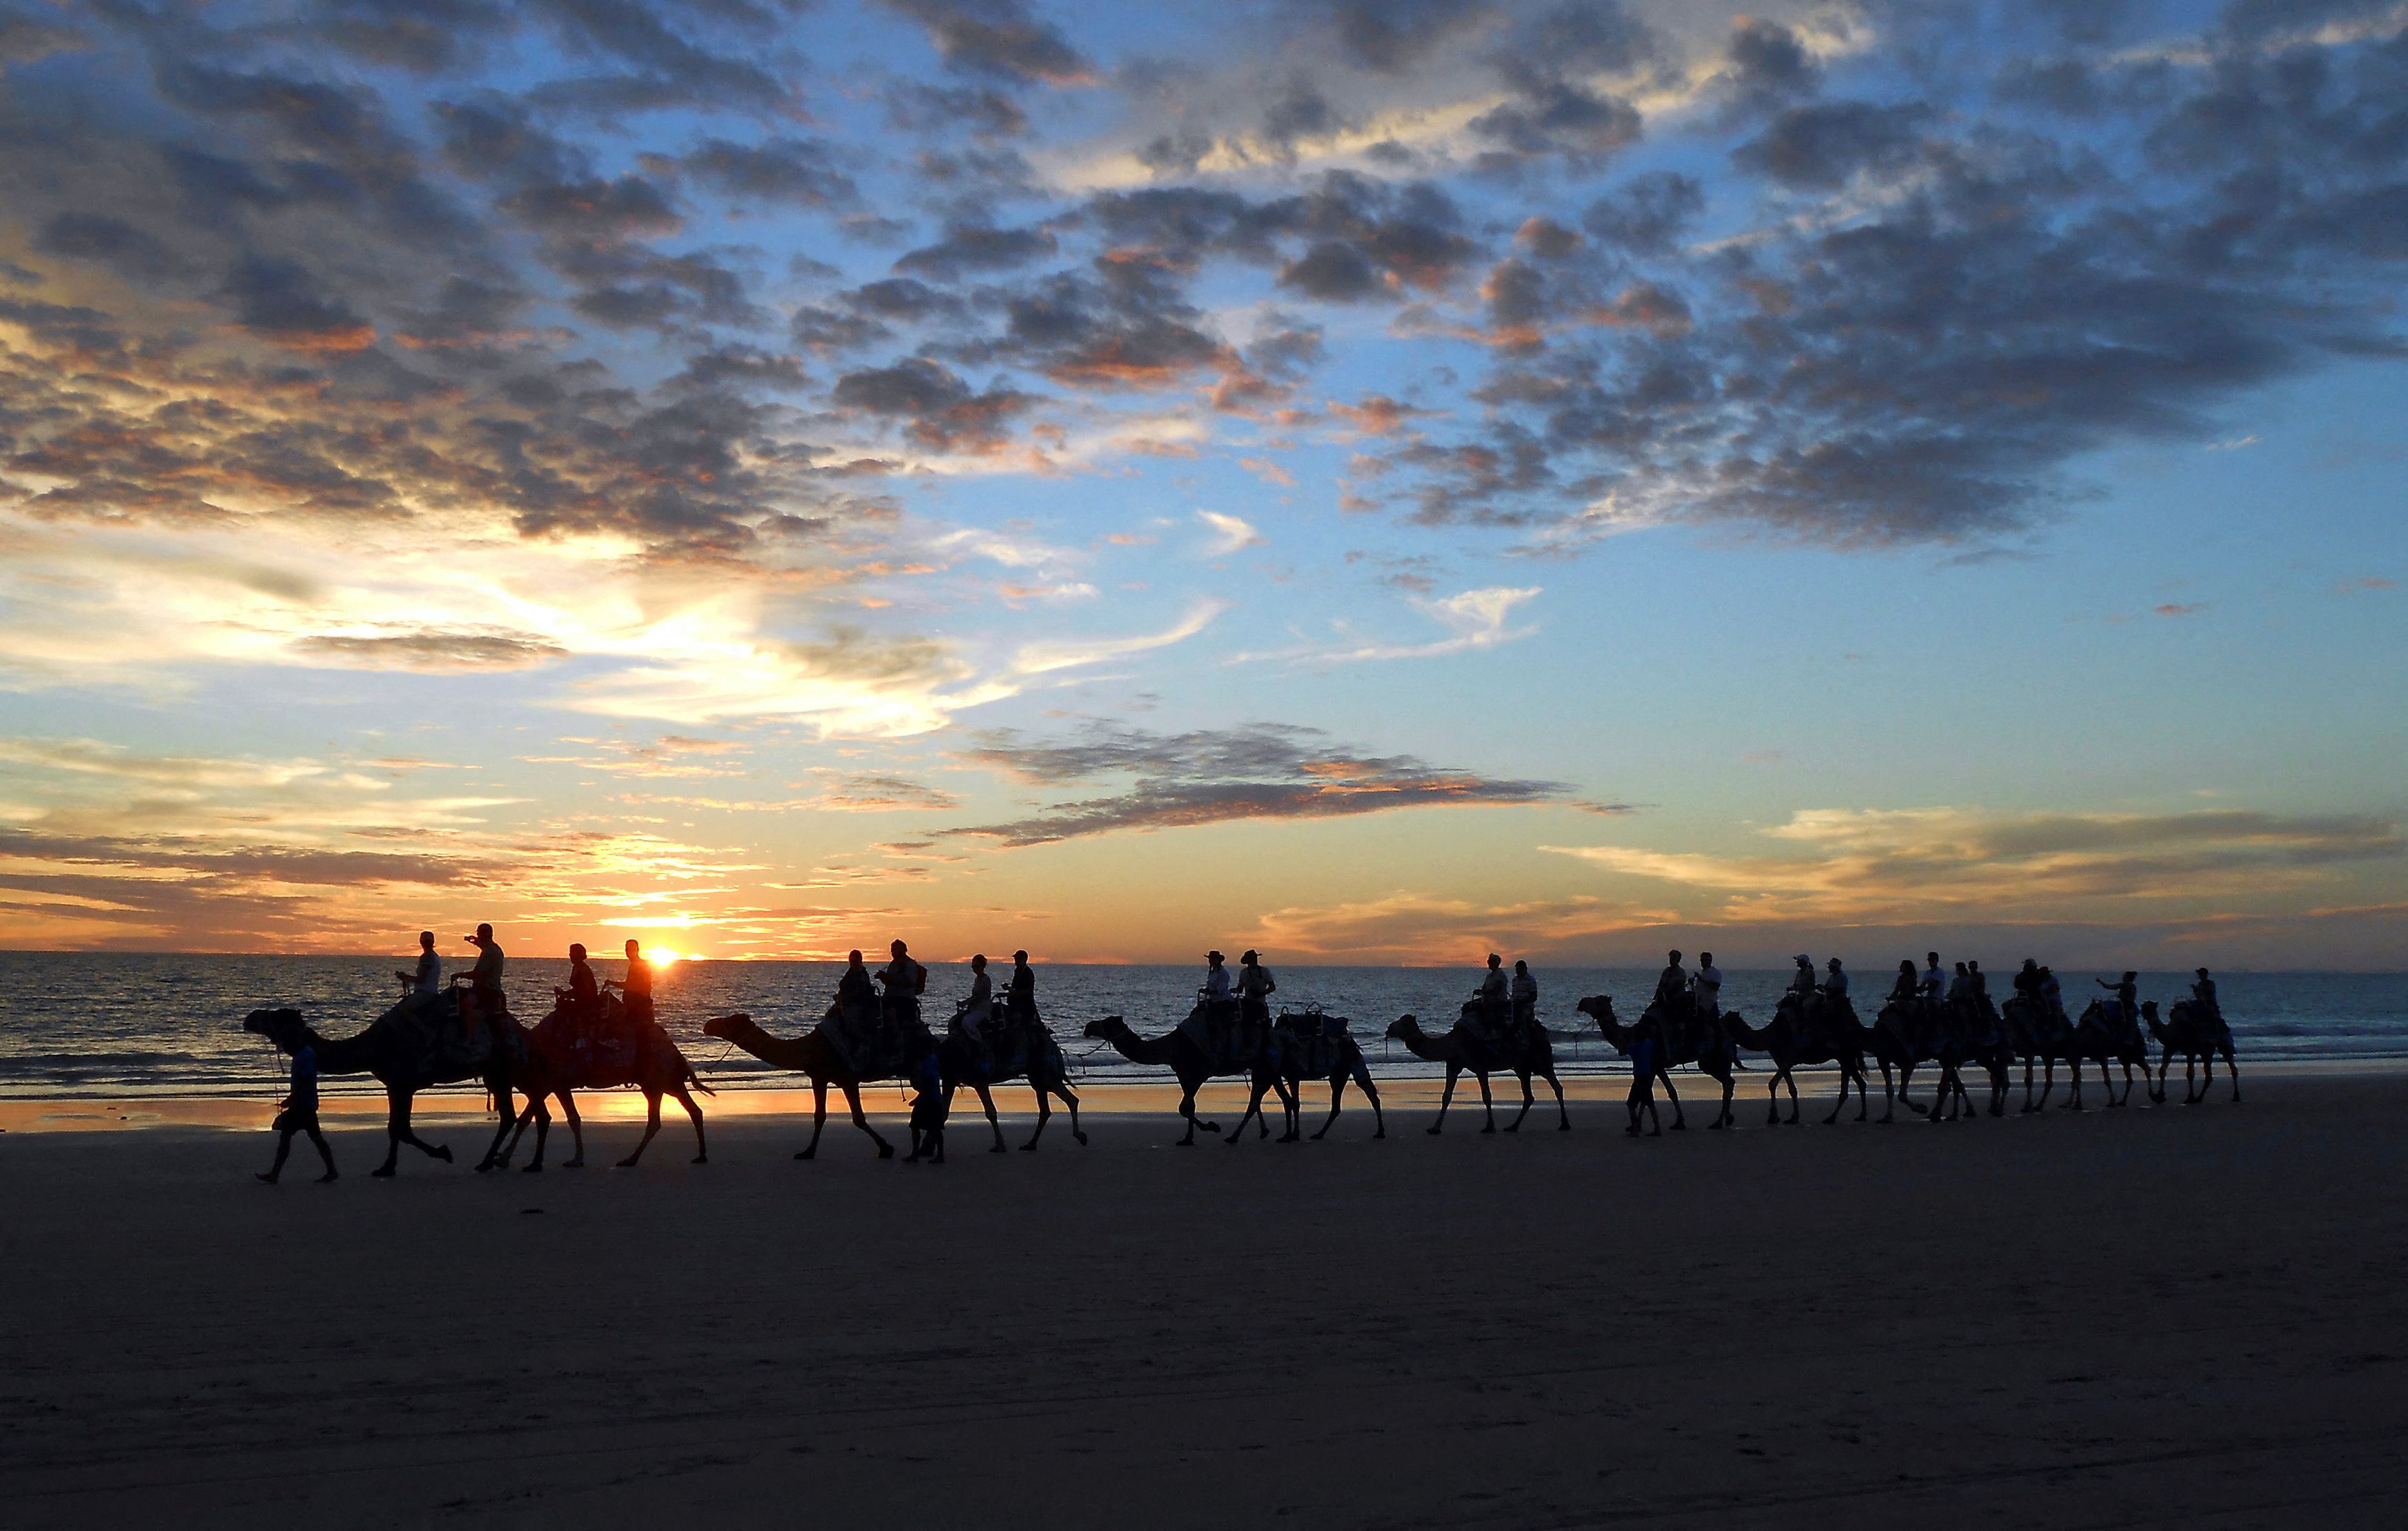 A camel train carries tourists on a sunset safari along Cable Beach located near the northwestern Australian town of Broome May 17, 2013. REUTERS/Julius Hunter